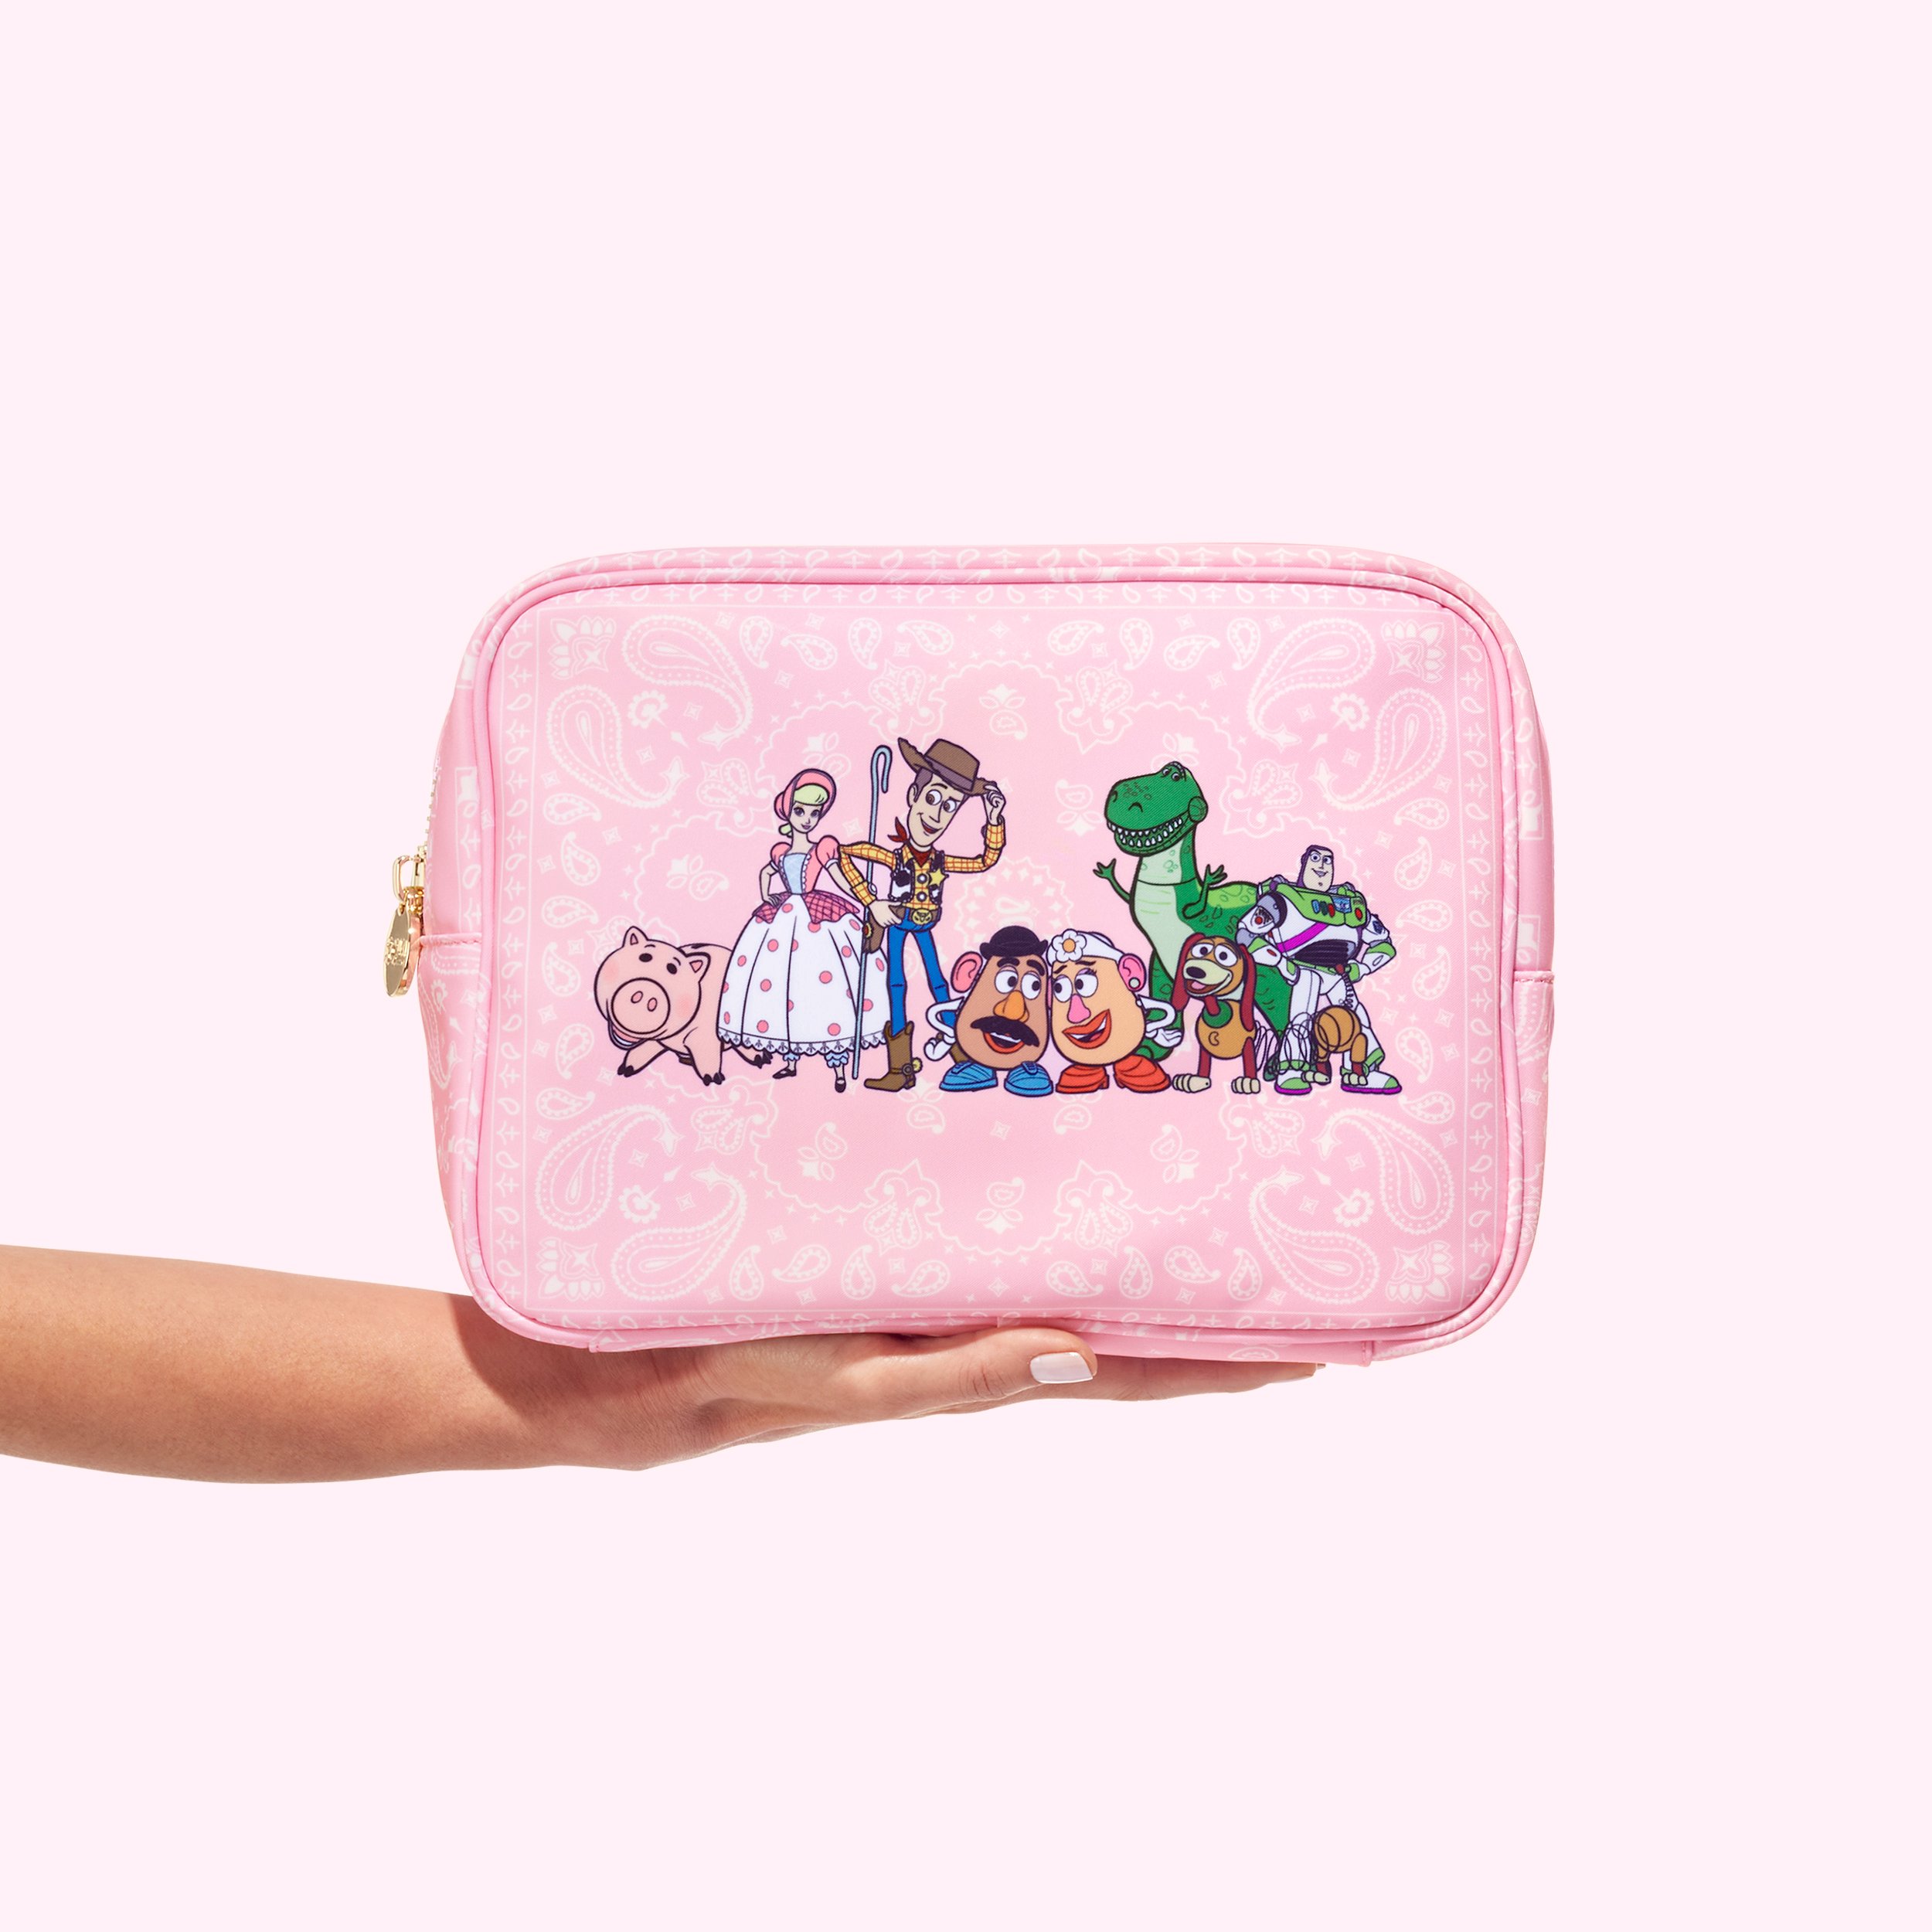 Stoney Clover Lane Works With Juicy Couture on Accessories Collab